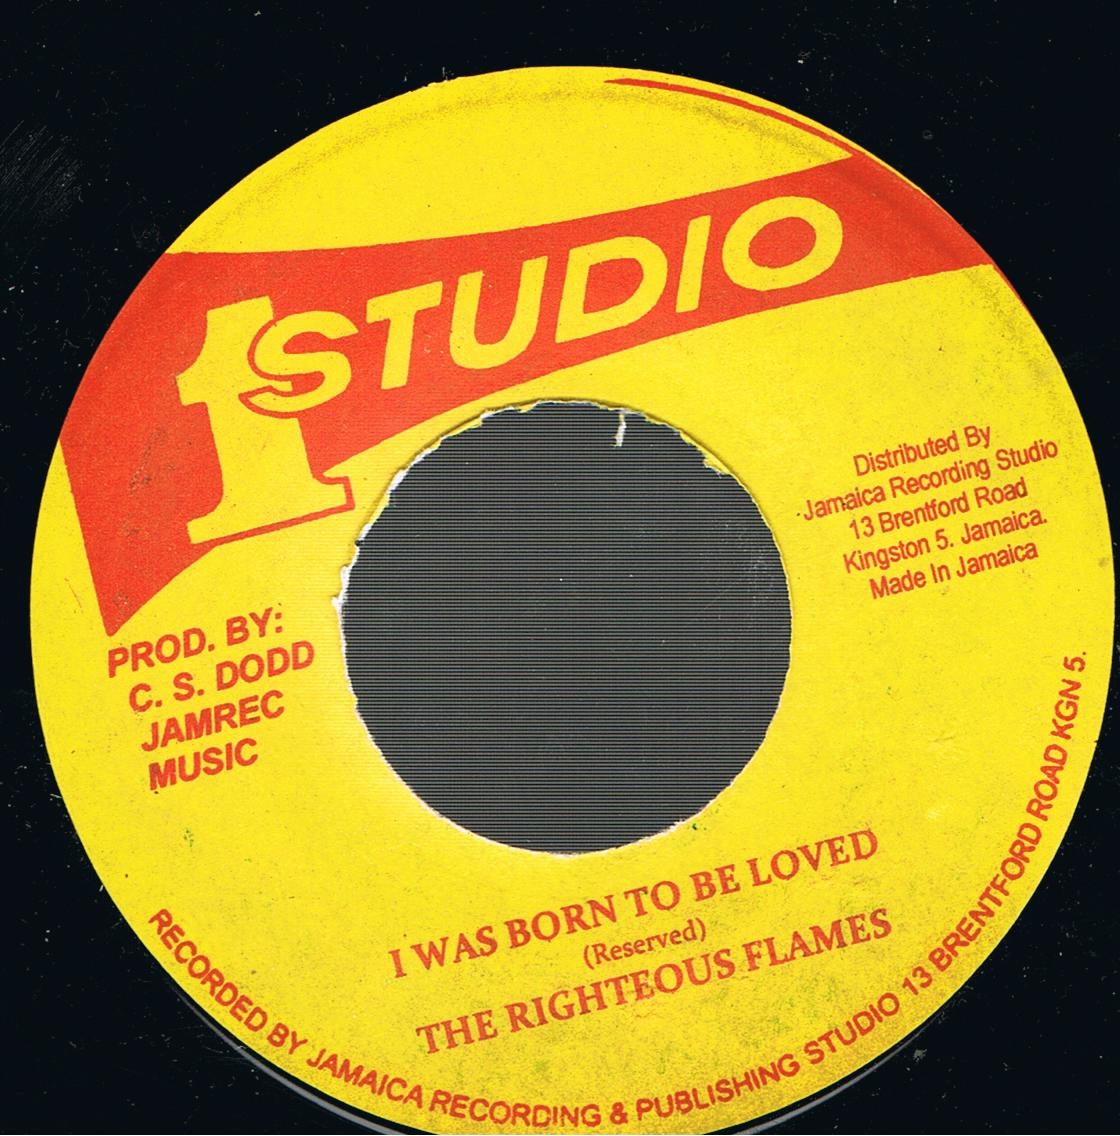 The Righteous Flames - I Was Born To Be Loved / Version (Original Stamper 7")